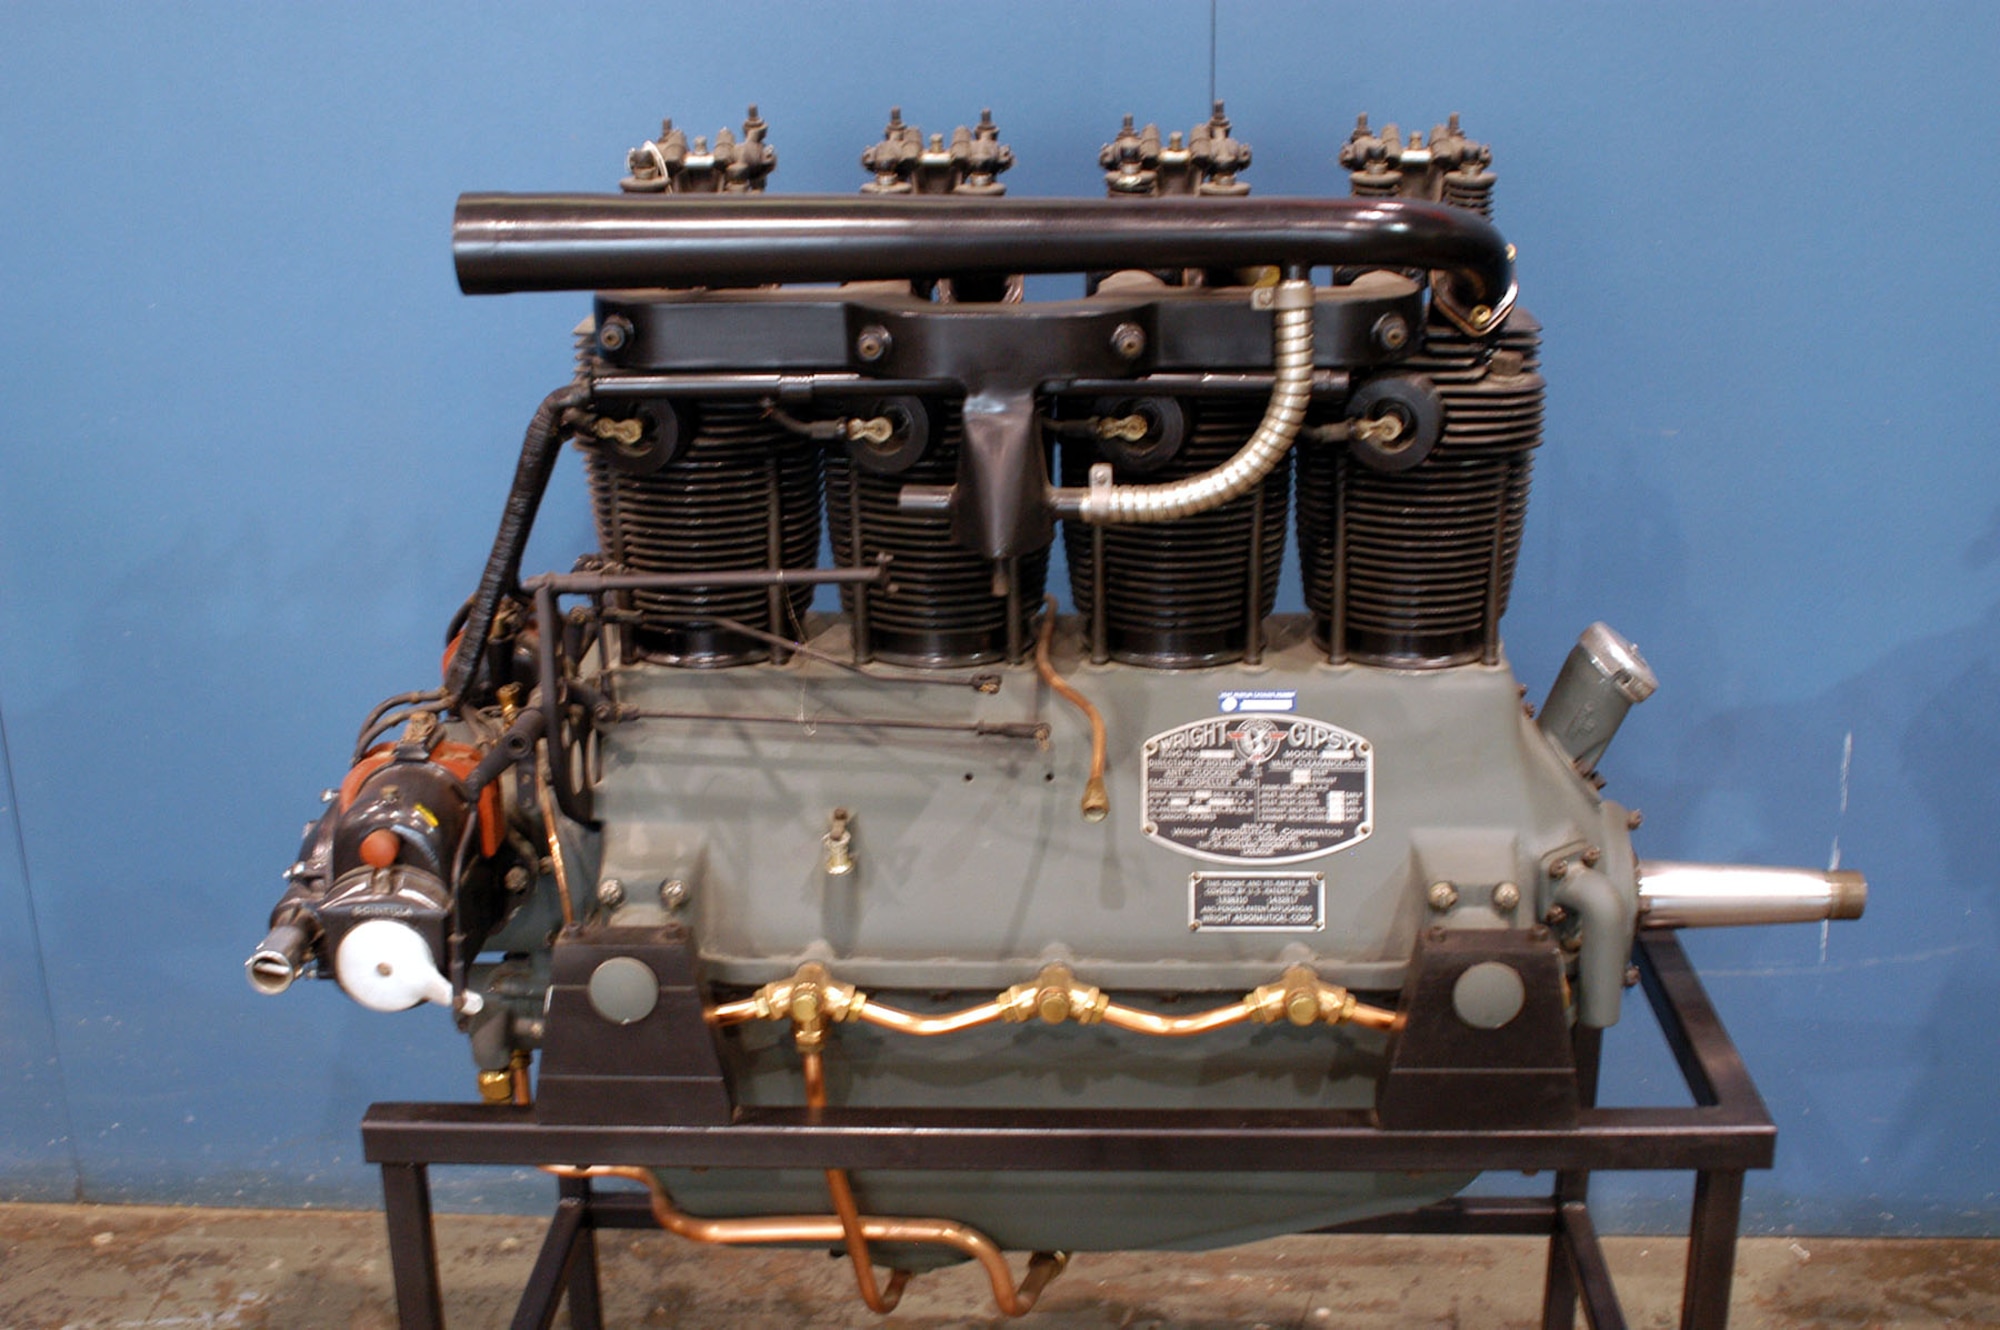 DAYTON, Ohio -- Wright Gipsy L-320 engine on display in the Research & Development Gallery at the National Museum of the United States Air Force. (U.S. Air Force photo)